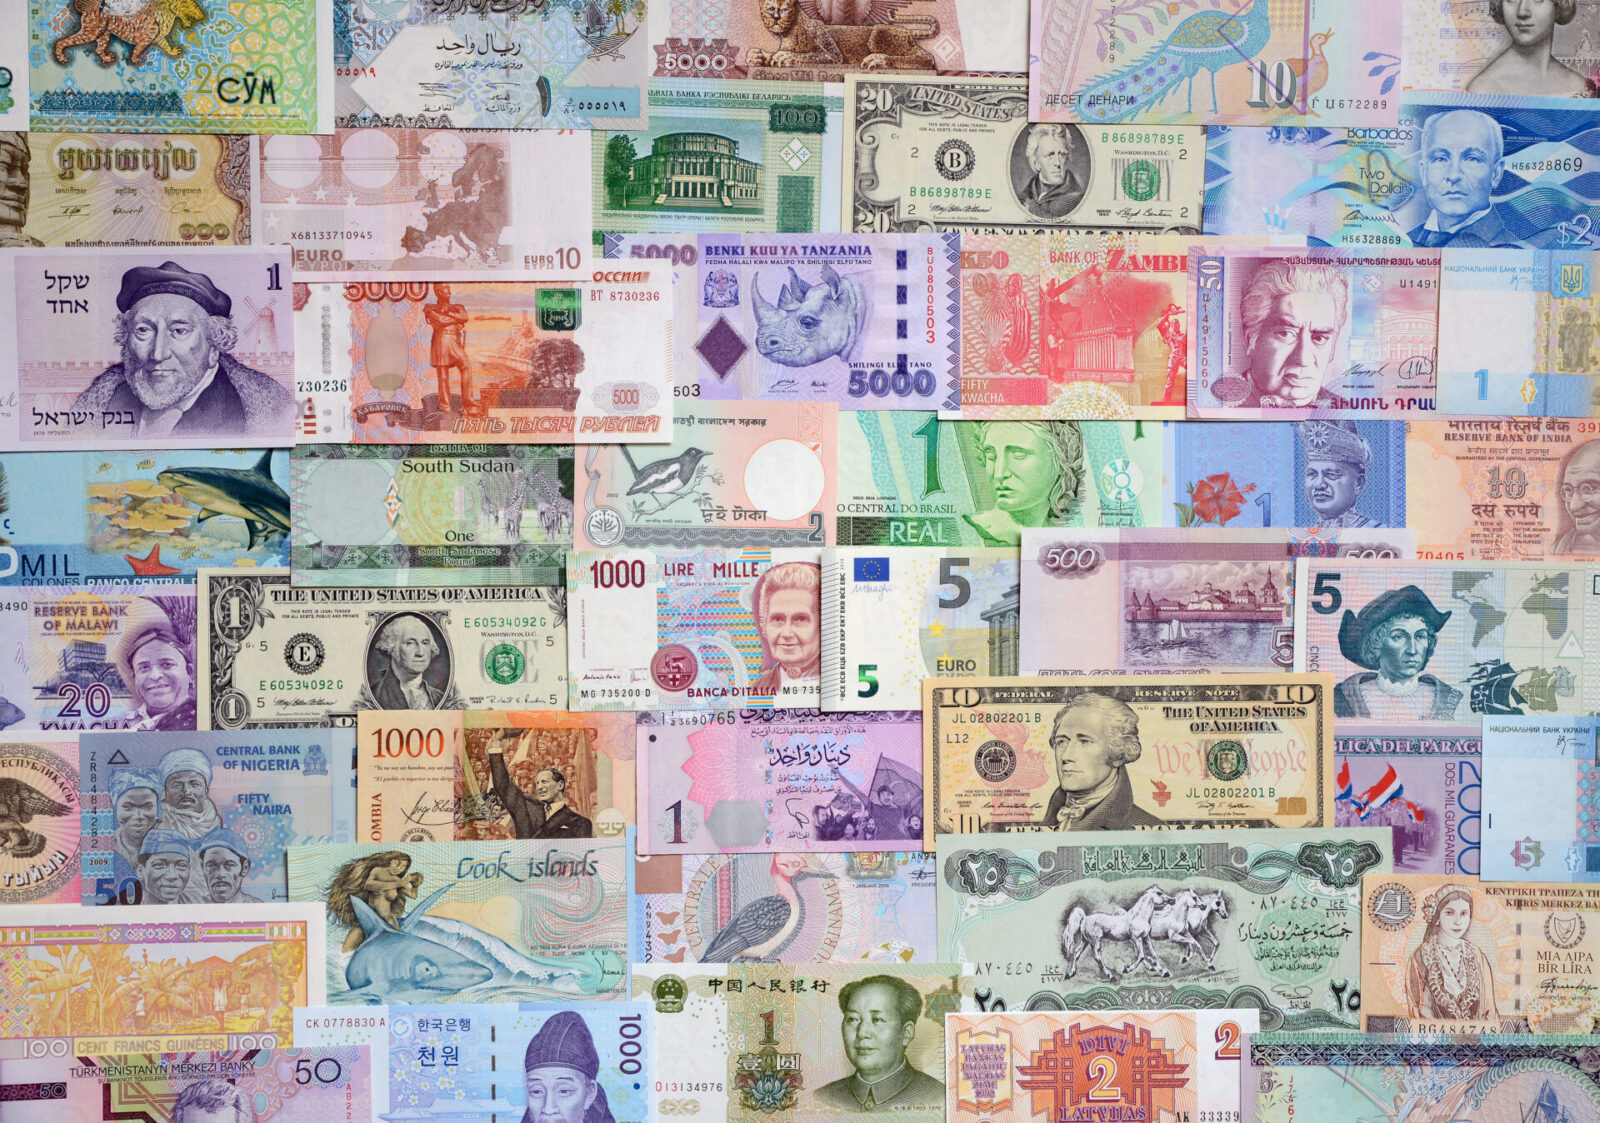 Global banknotes are stapled to the wall